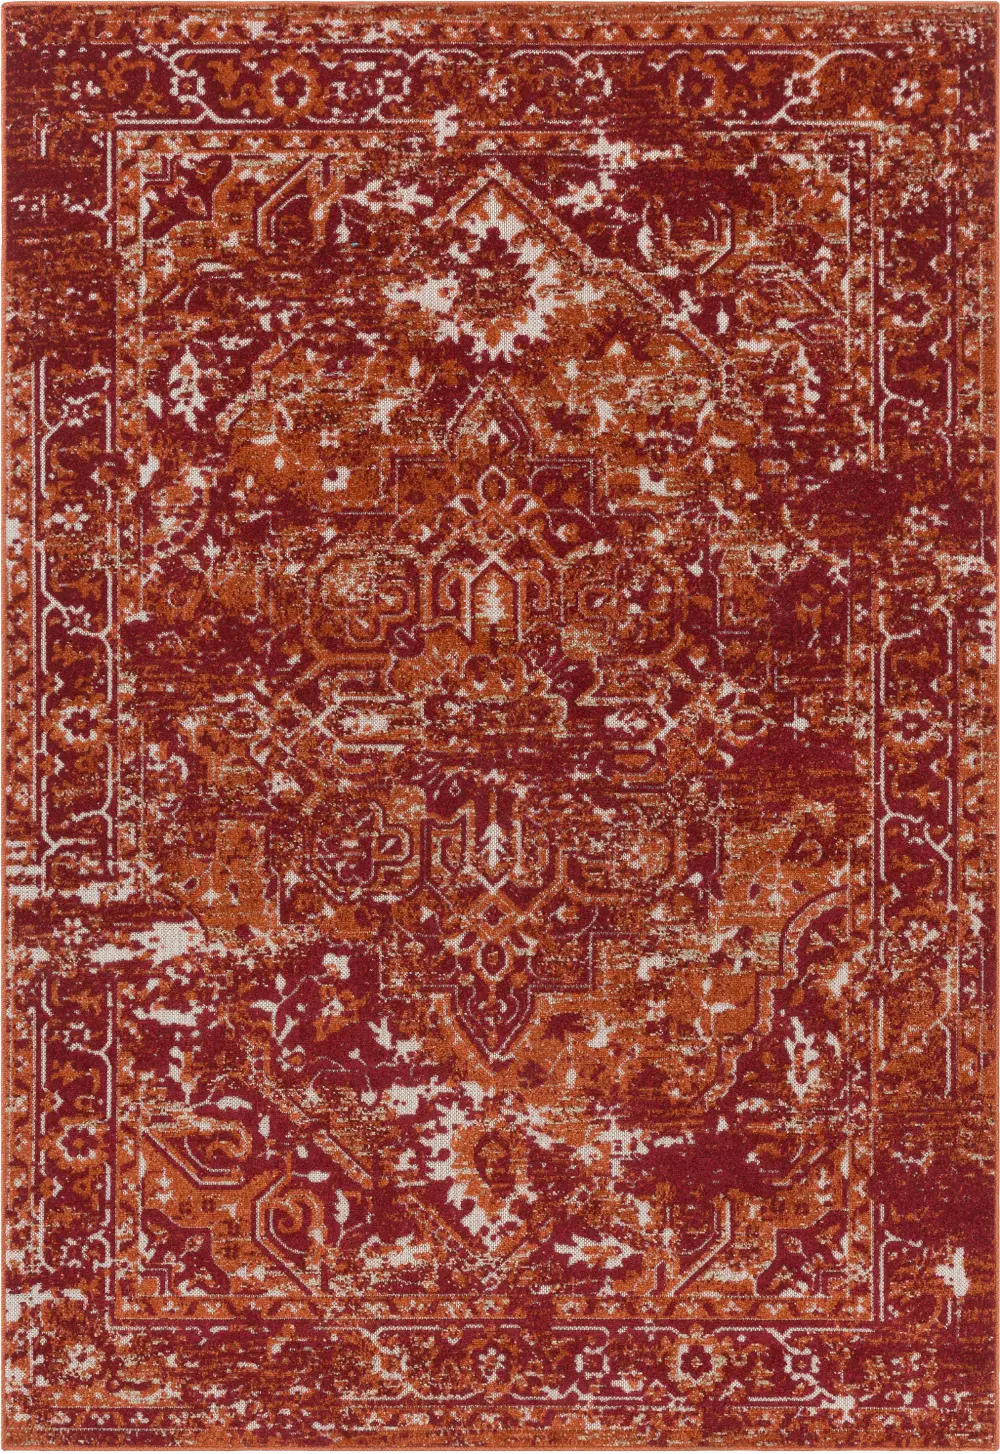 8 x 10 Large Red, Orange, and Ivory Indoor-Outdoor Rug - Stardust-1